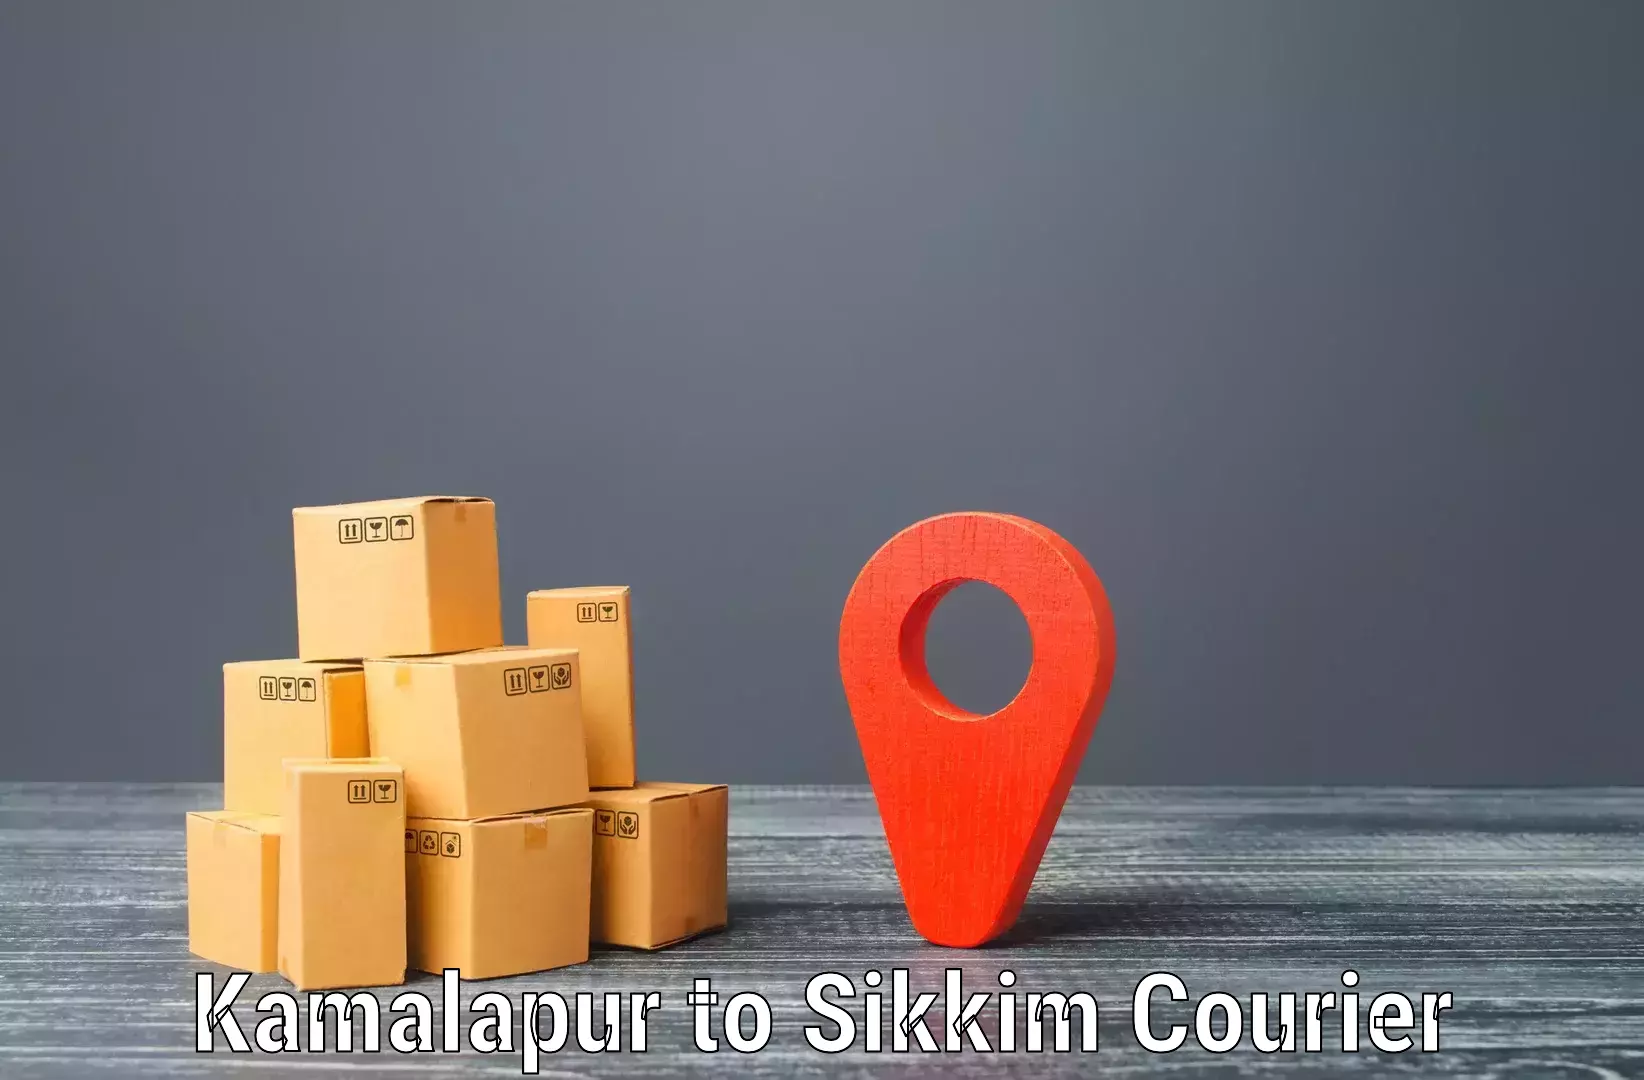 Multi-package shipping in Kamalapur to Pelling